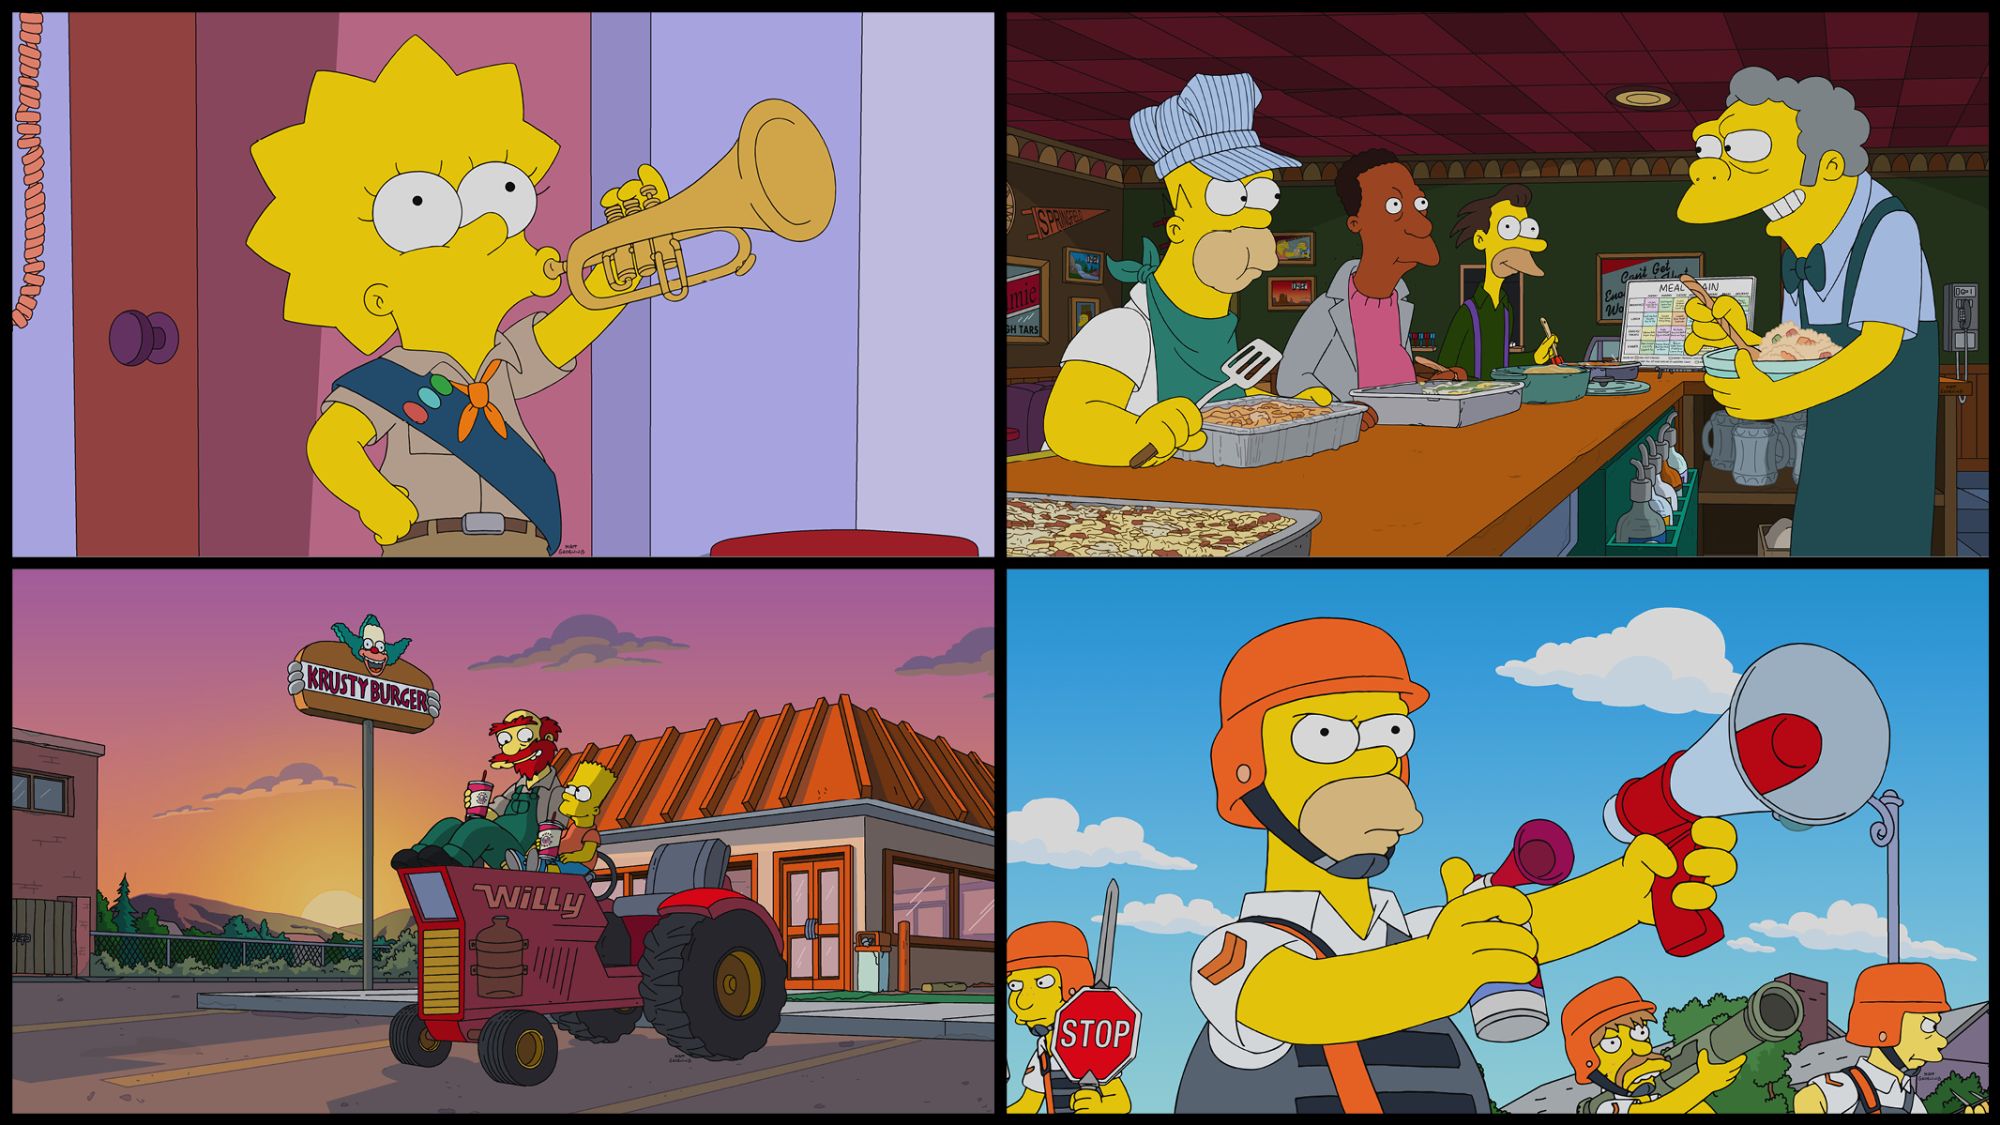 In its 35th season, "The Simpsons" is still finding new stories in familiar corners of Springfield, from Homer's short-lived stint as a crossing guard to Groundskeeper Willie's new friendship with Bart.